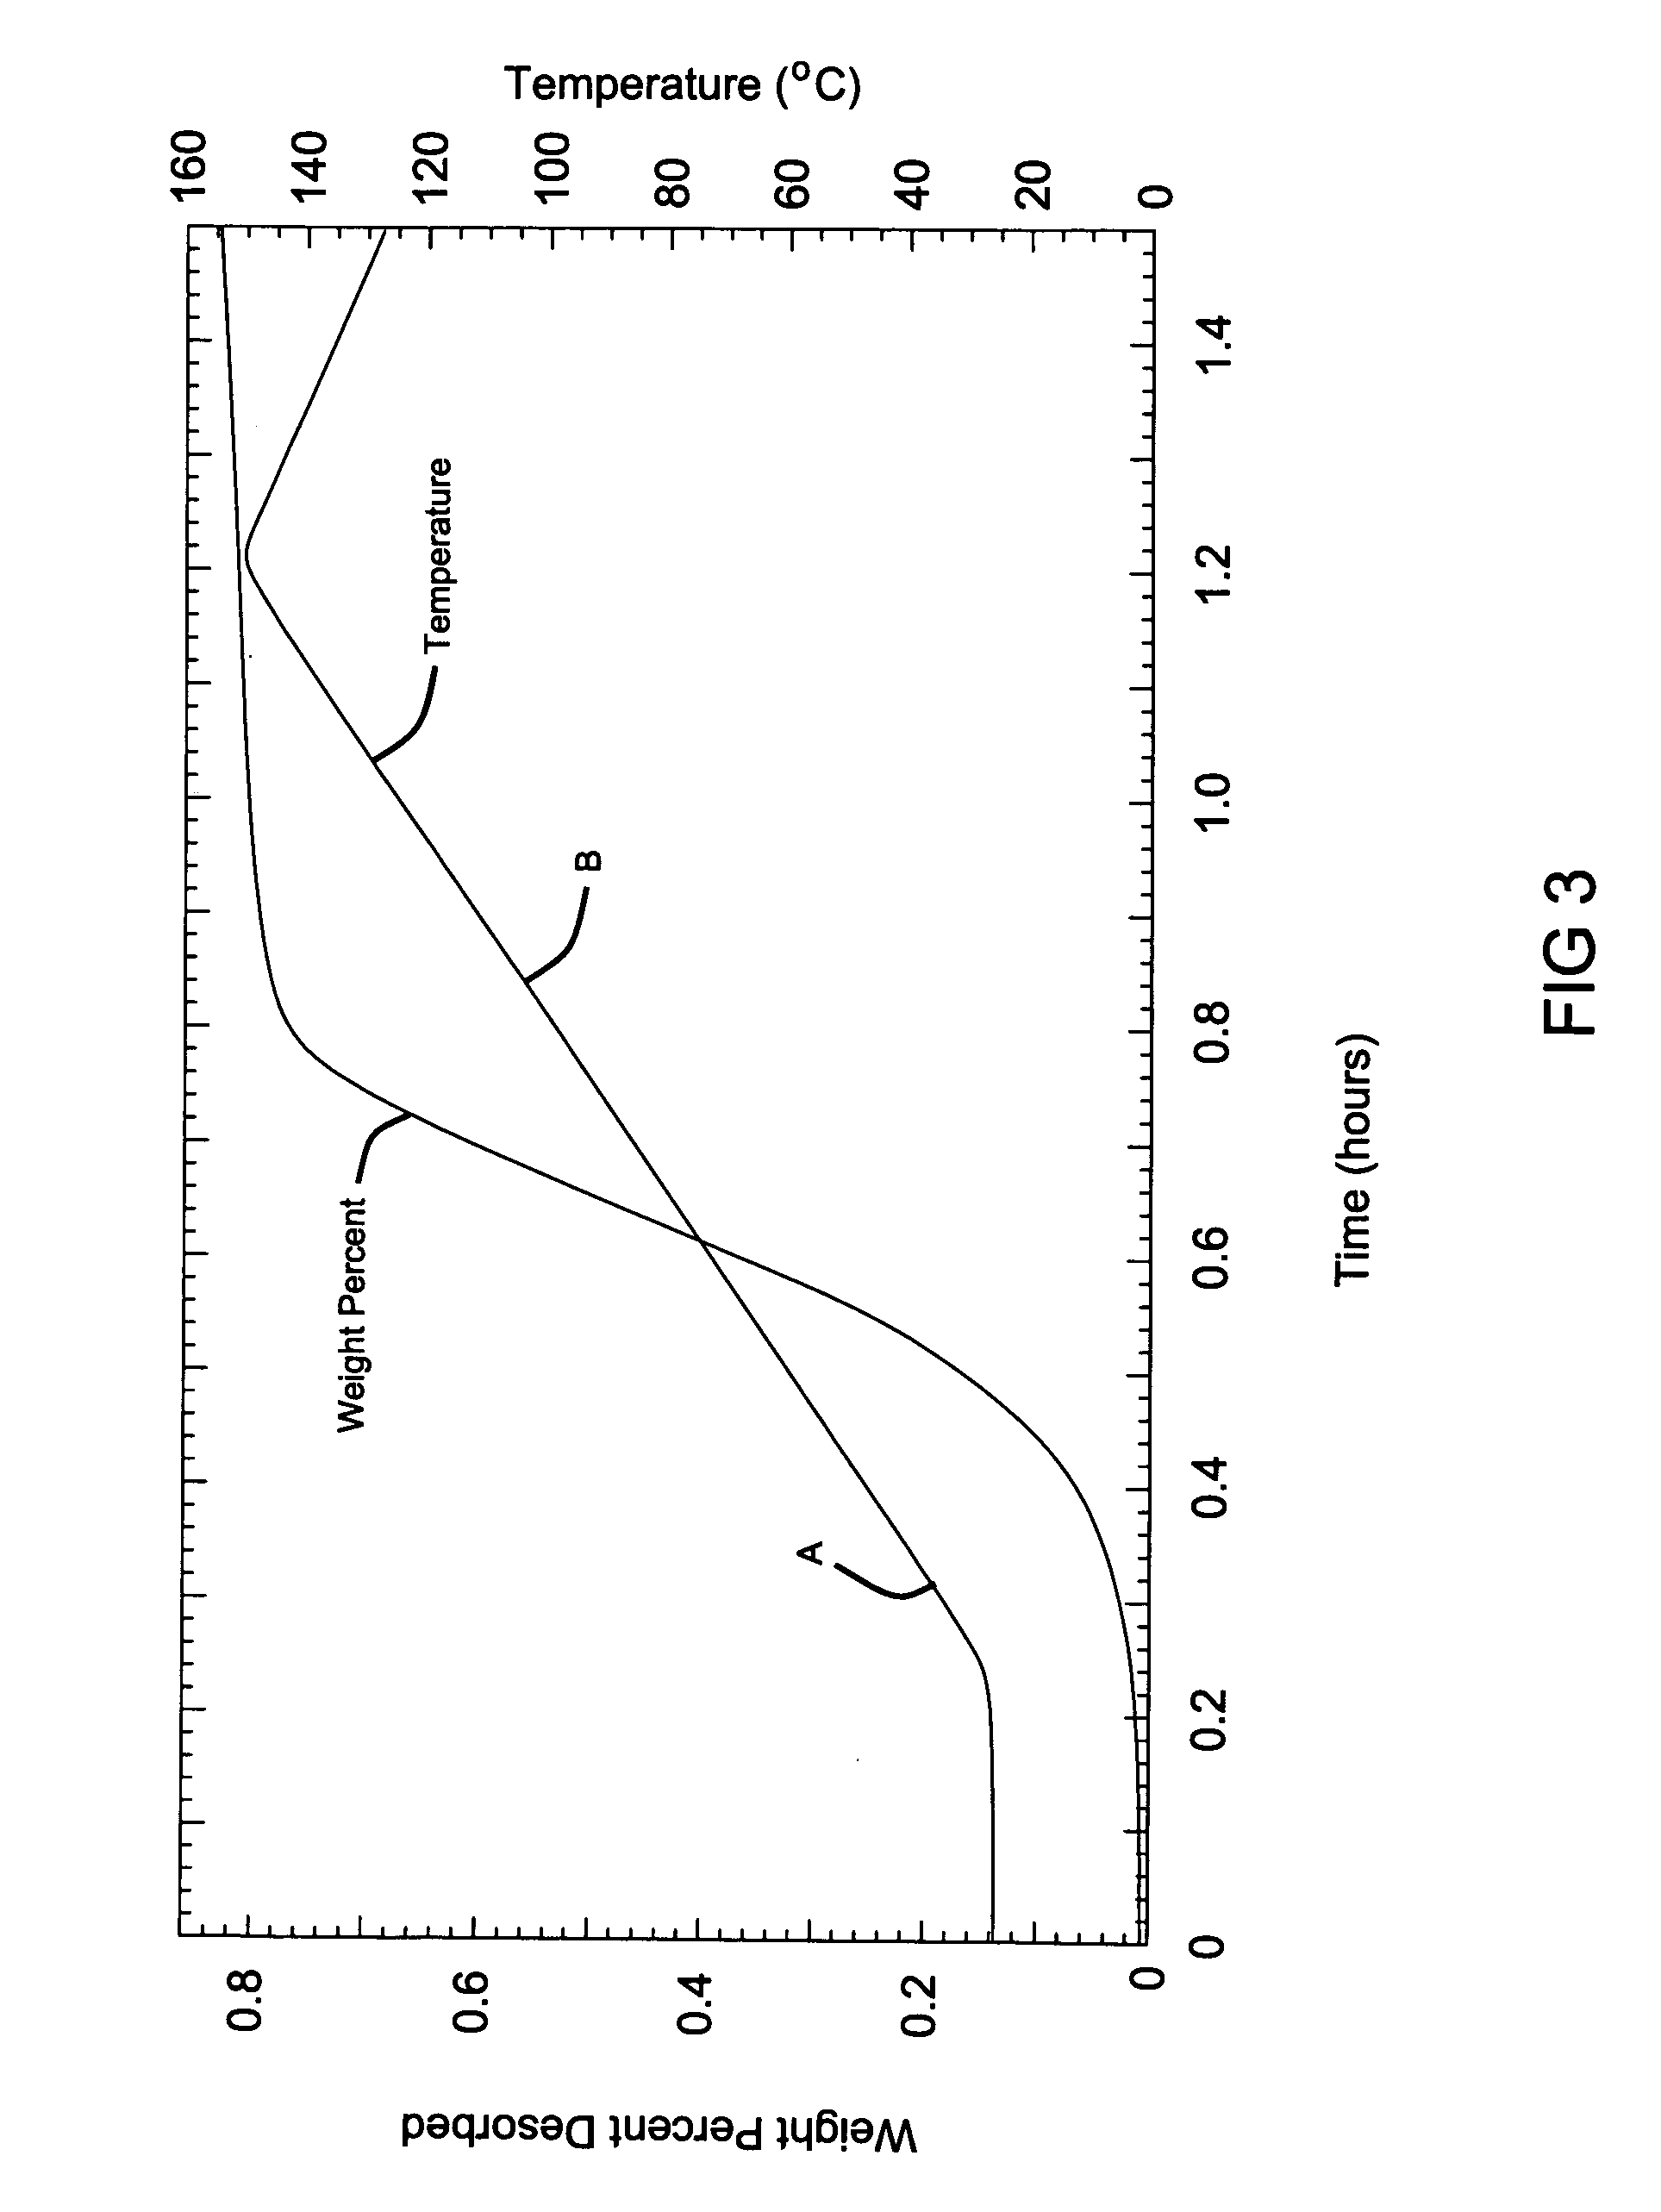 Hydrogen storage materials and methods including hydrides and hydroxides